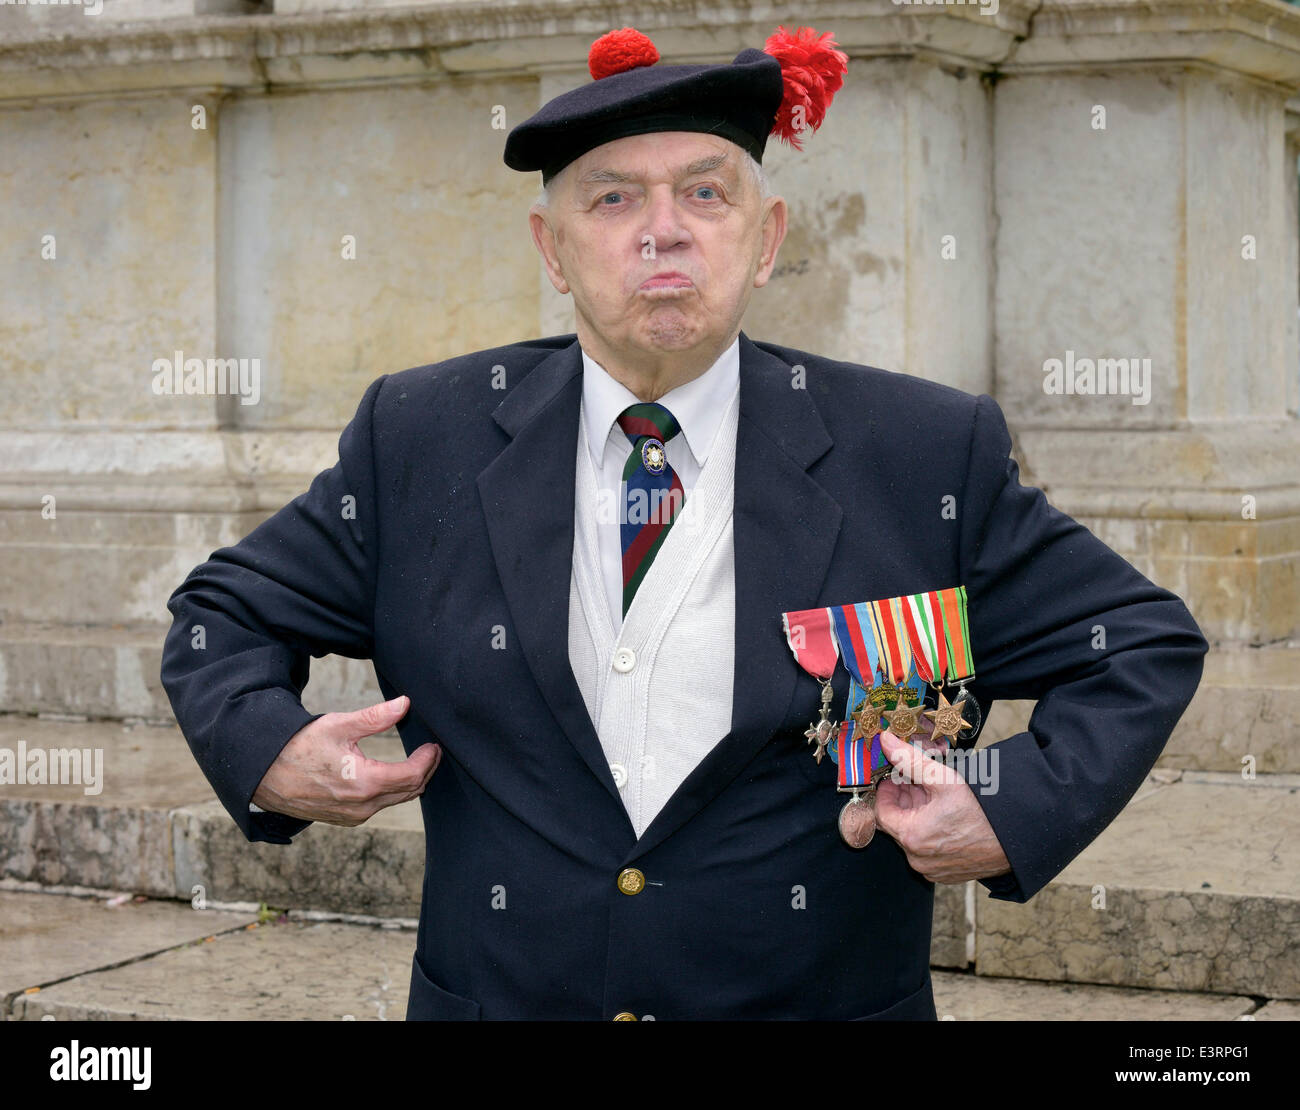 Manchester, UK. 28th June, 2014. 91 year-old John Clarke, a member of the Black Watch Association attends the Manchester Armed Forces Day in Piccadilly Gardens. John, a holder of the MBE and Polish Gold Cross, is possibly the last surviving soldier from the Battle of Monte Cassino in Italy during WW2. Amed Forces Day Manchester, UK Credit:  John Fryer/Alamy Live News Stock Photo